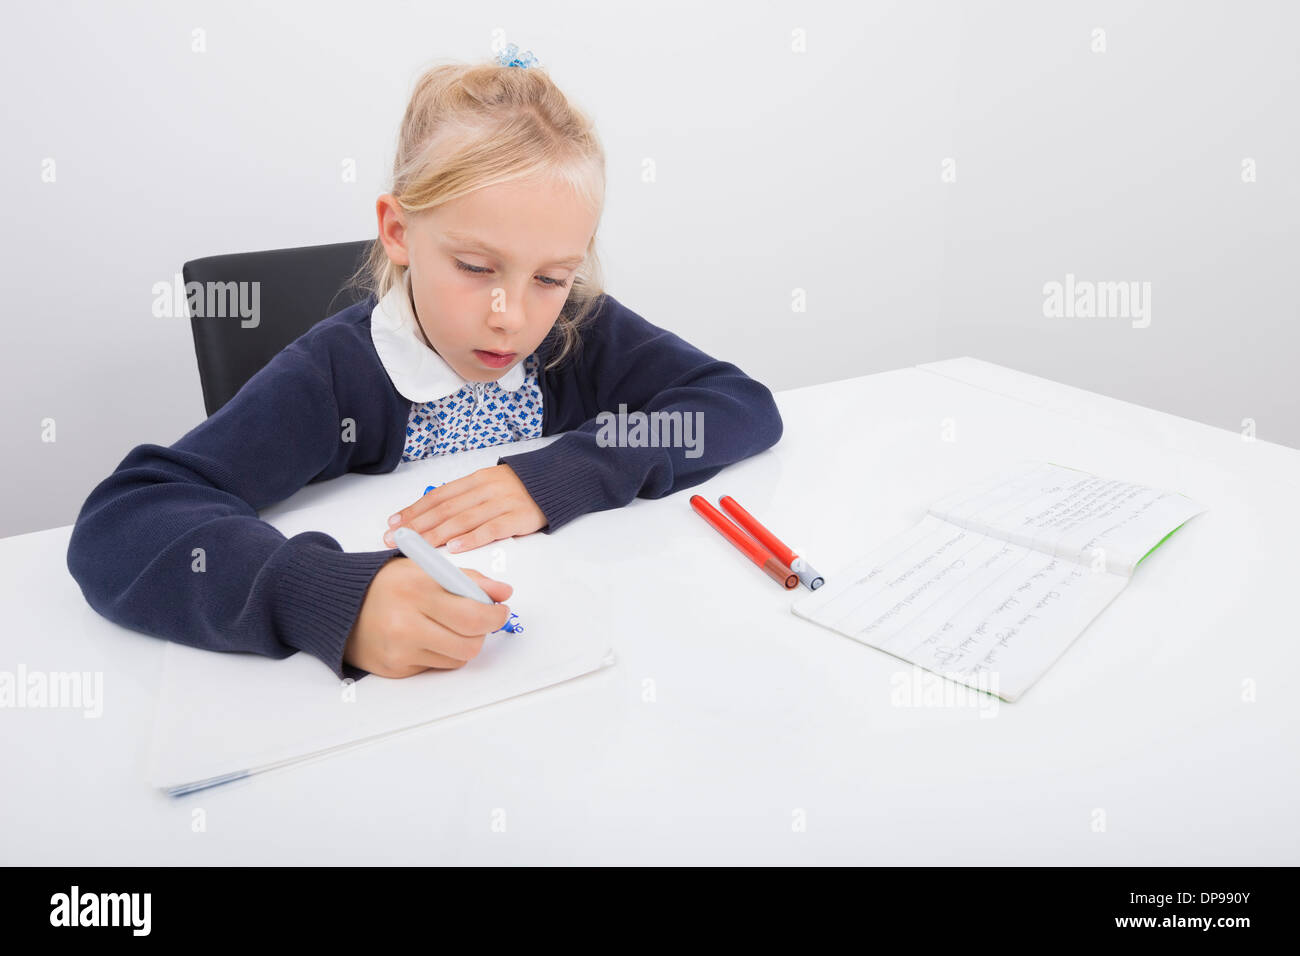 Girl drawing on paper with felt tip pen at table Stock Photo